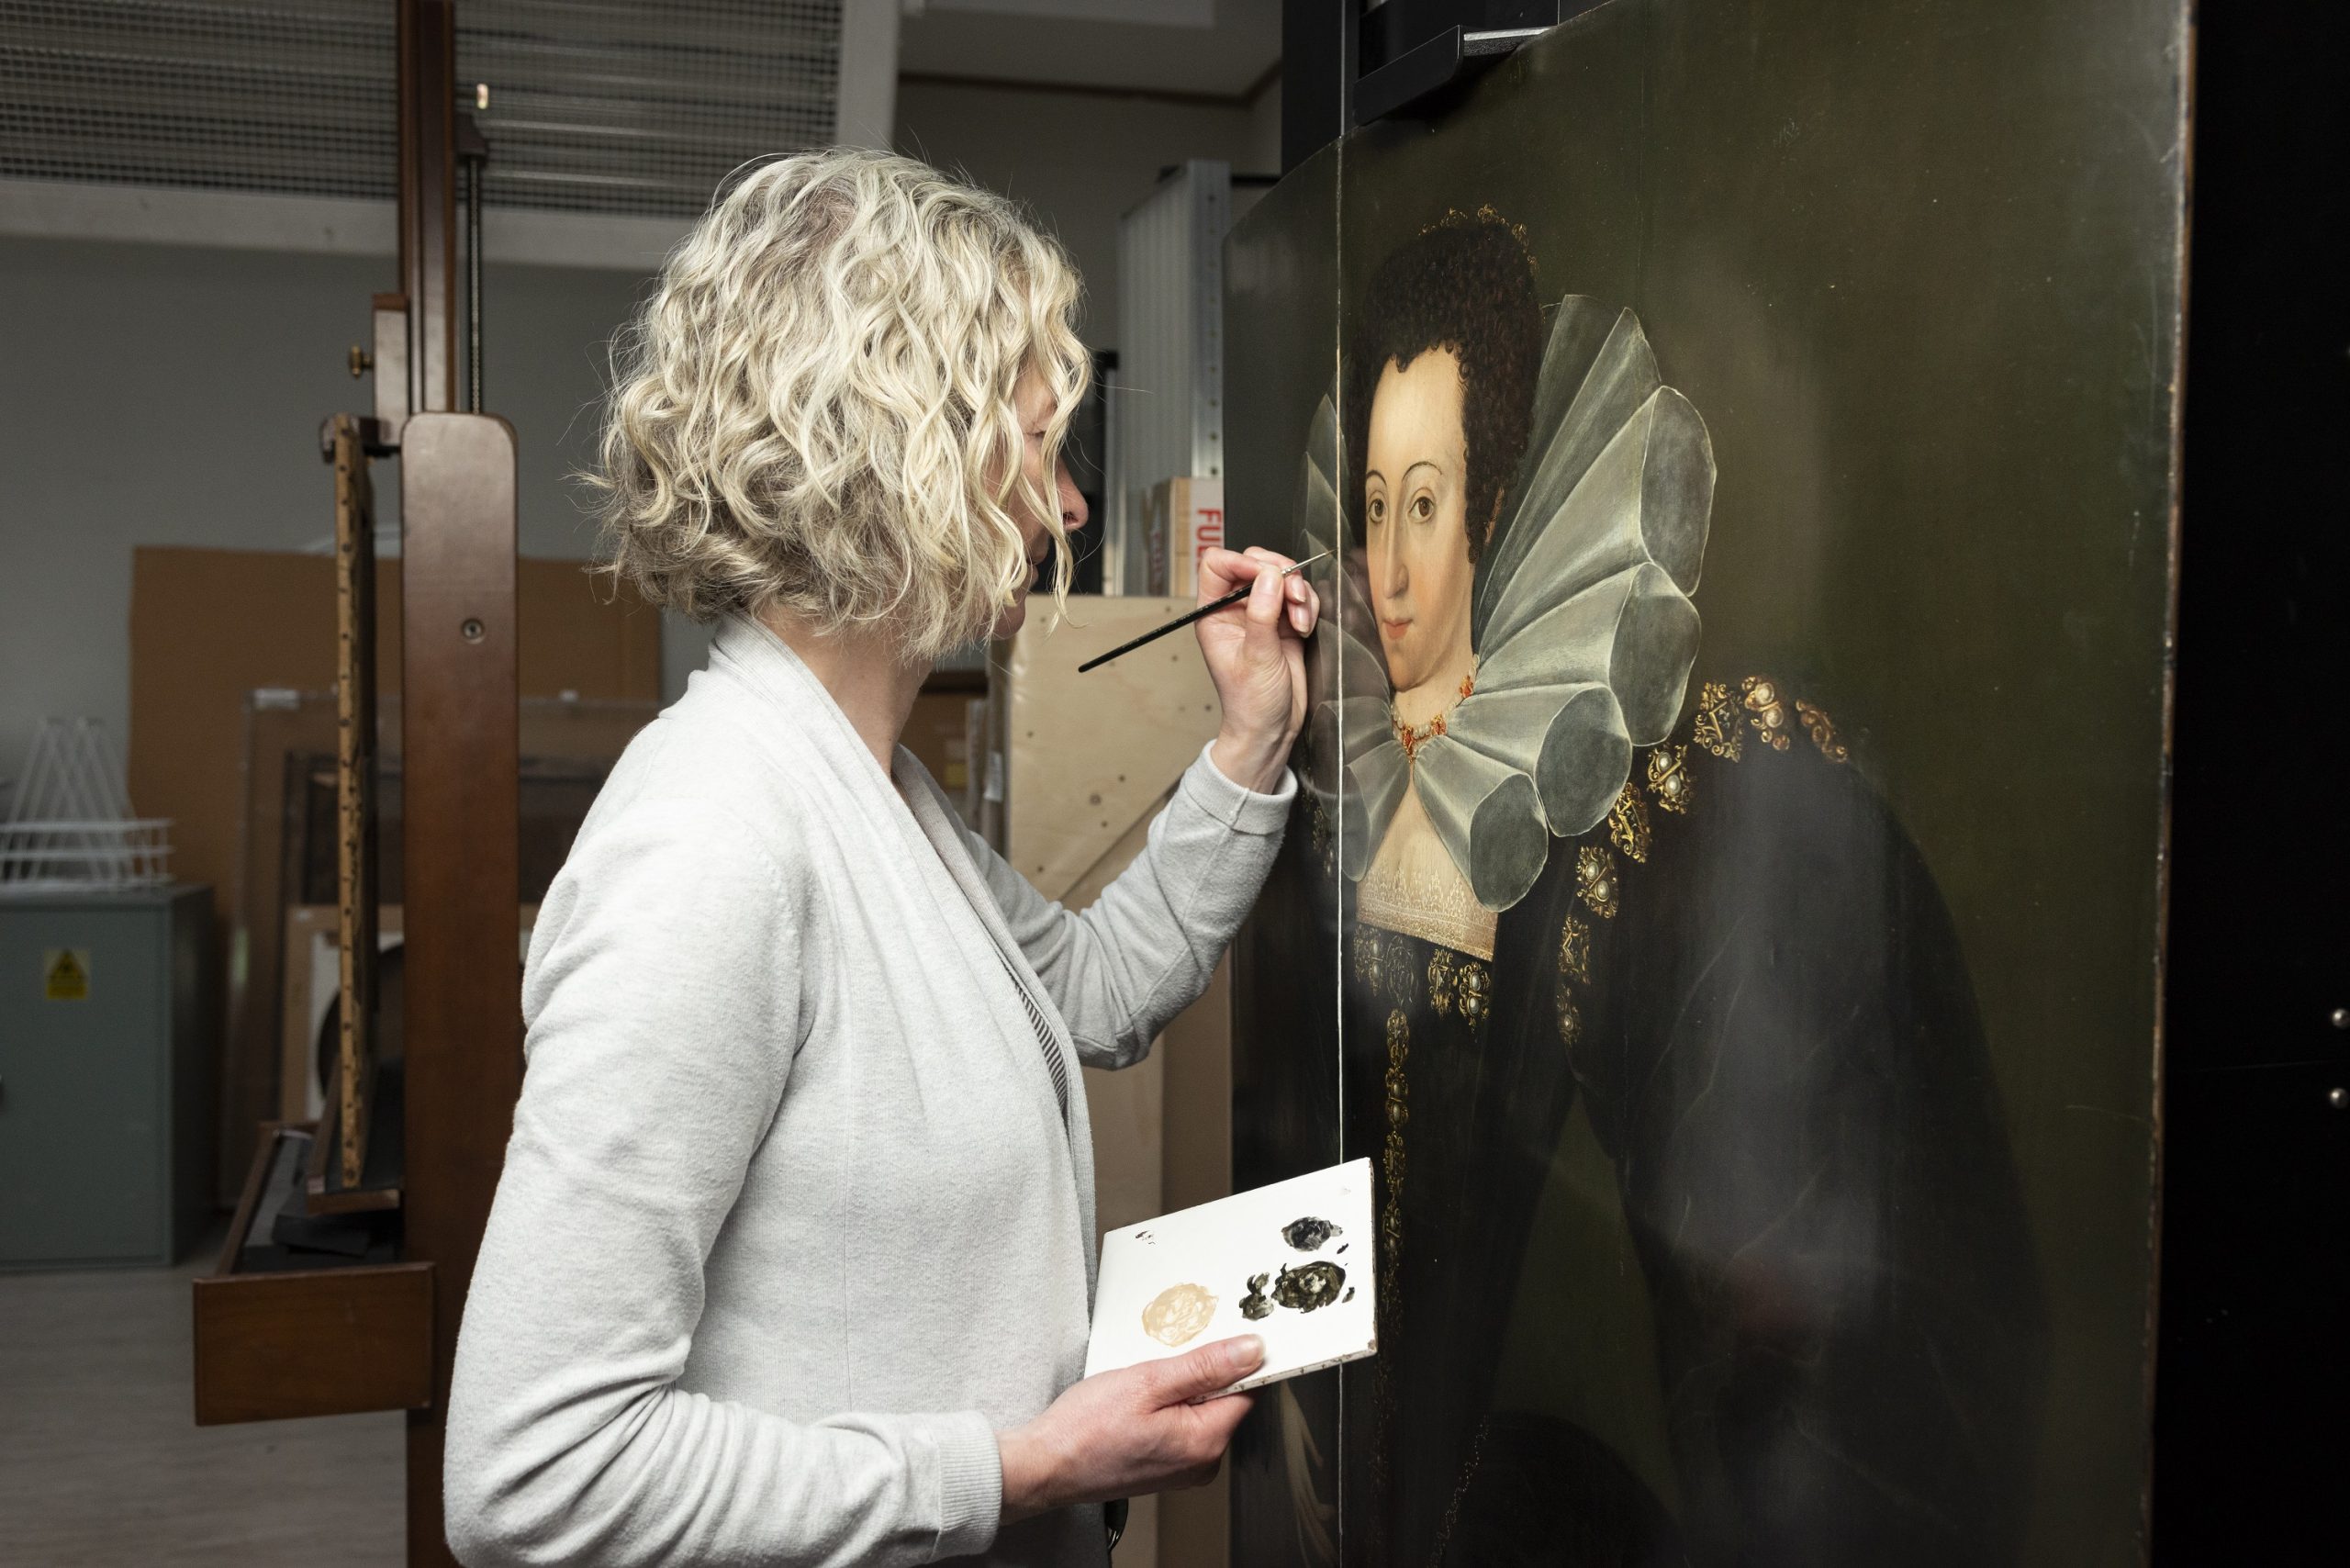 Mysterious Tudor masterpiece to be restored thanks to successful fundraising